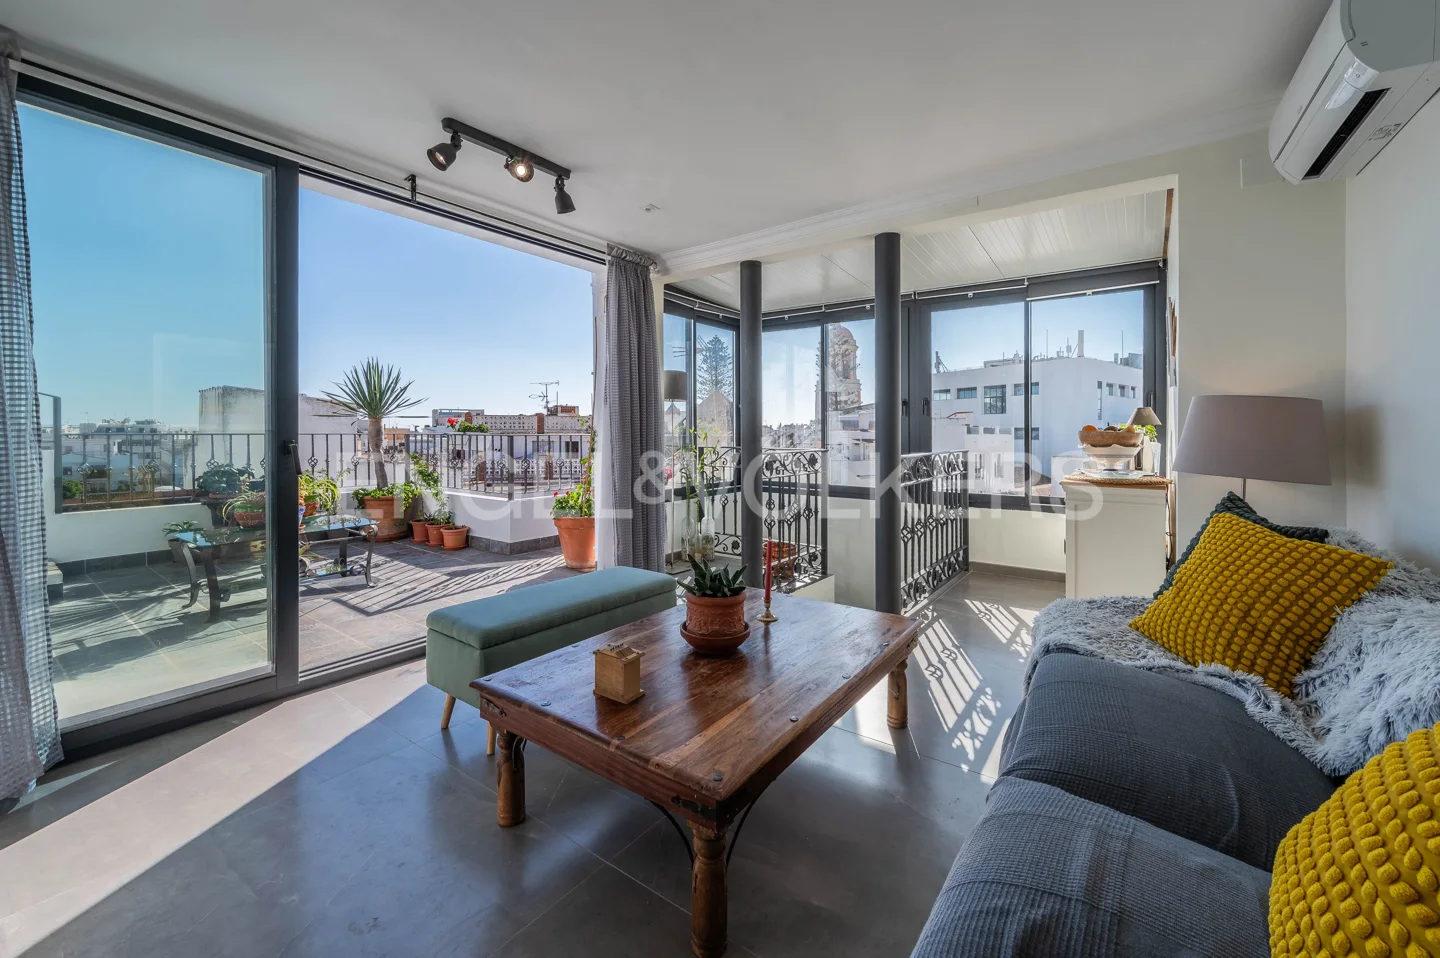 Refurbished and furnished townhouse in the historic centre of Estepona